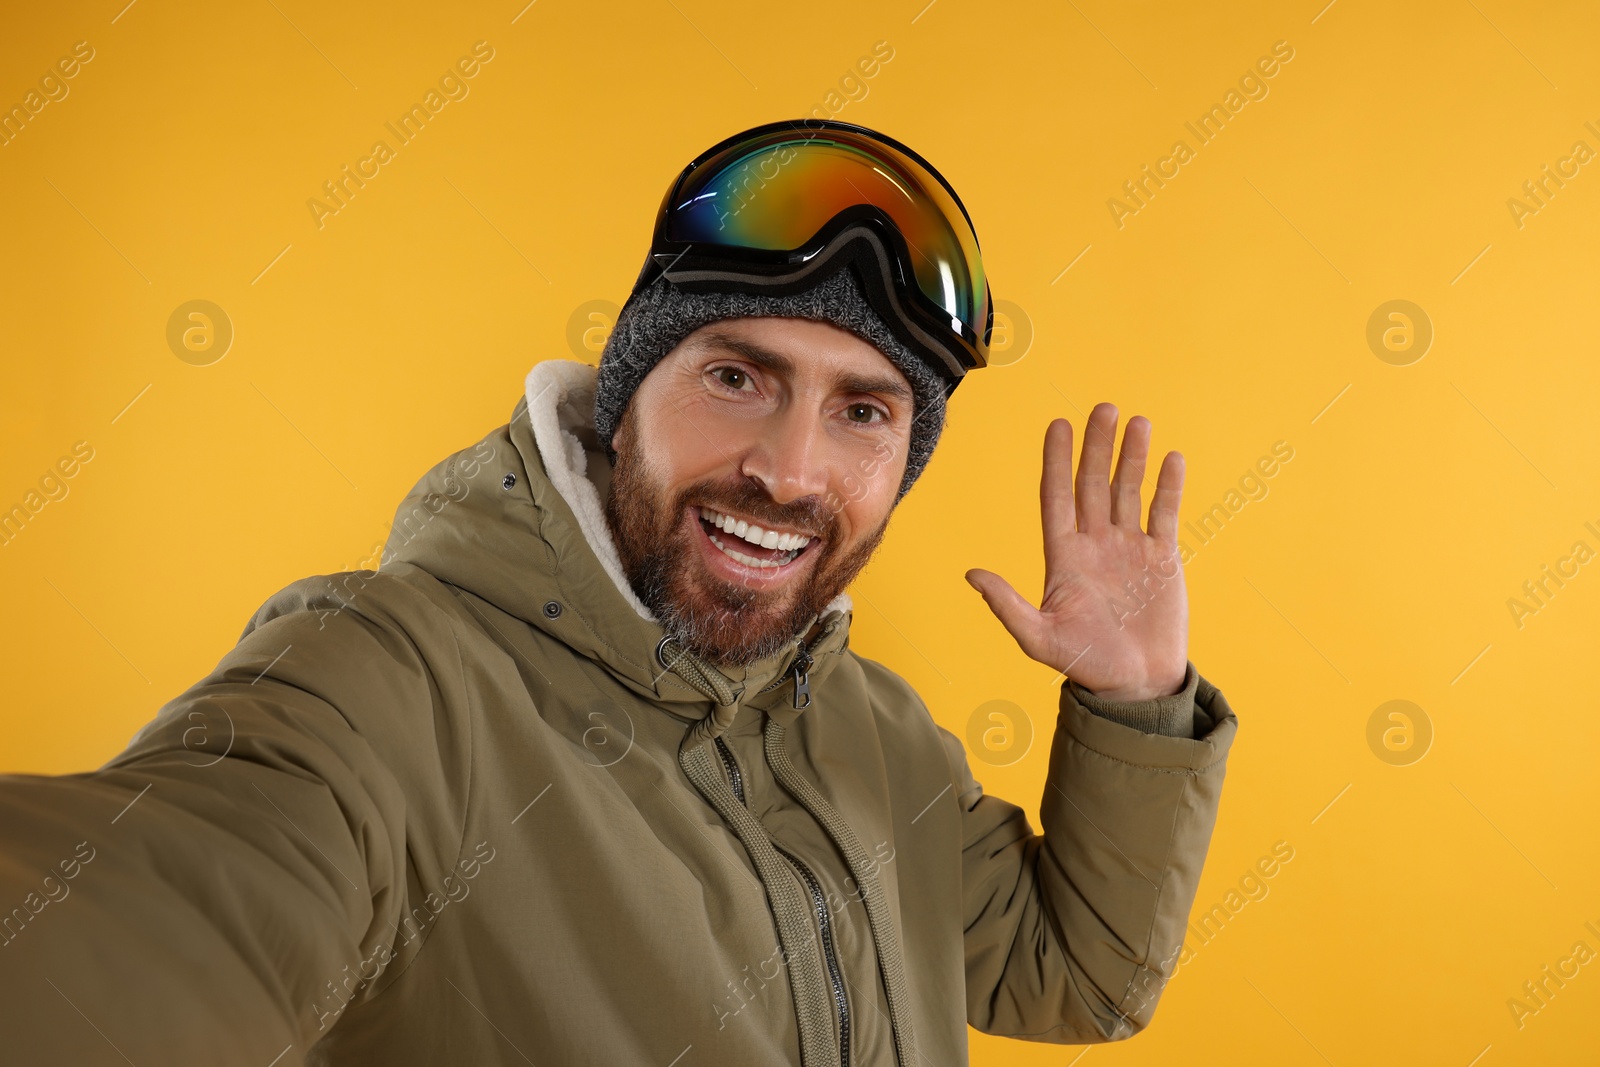 Photo of Winter sports. Happy man in ski suit and goggles taking selfie on orange background, space for text